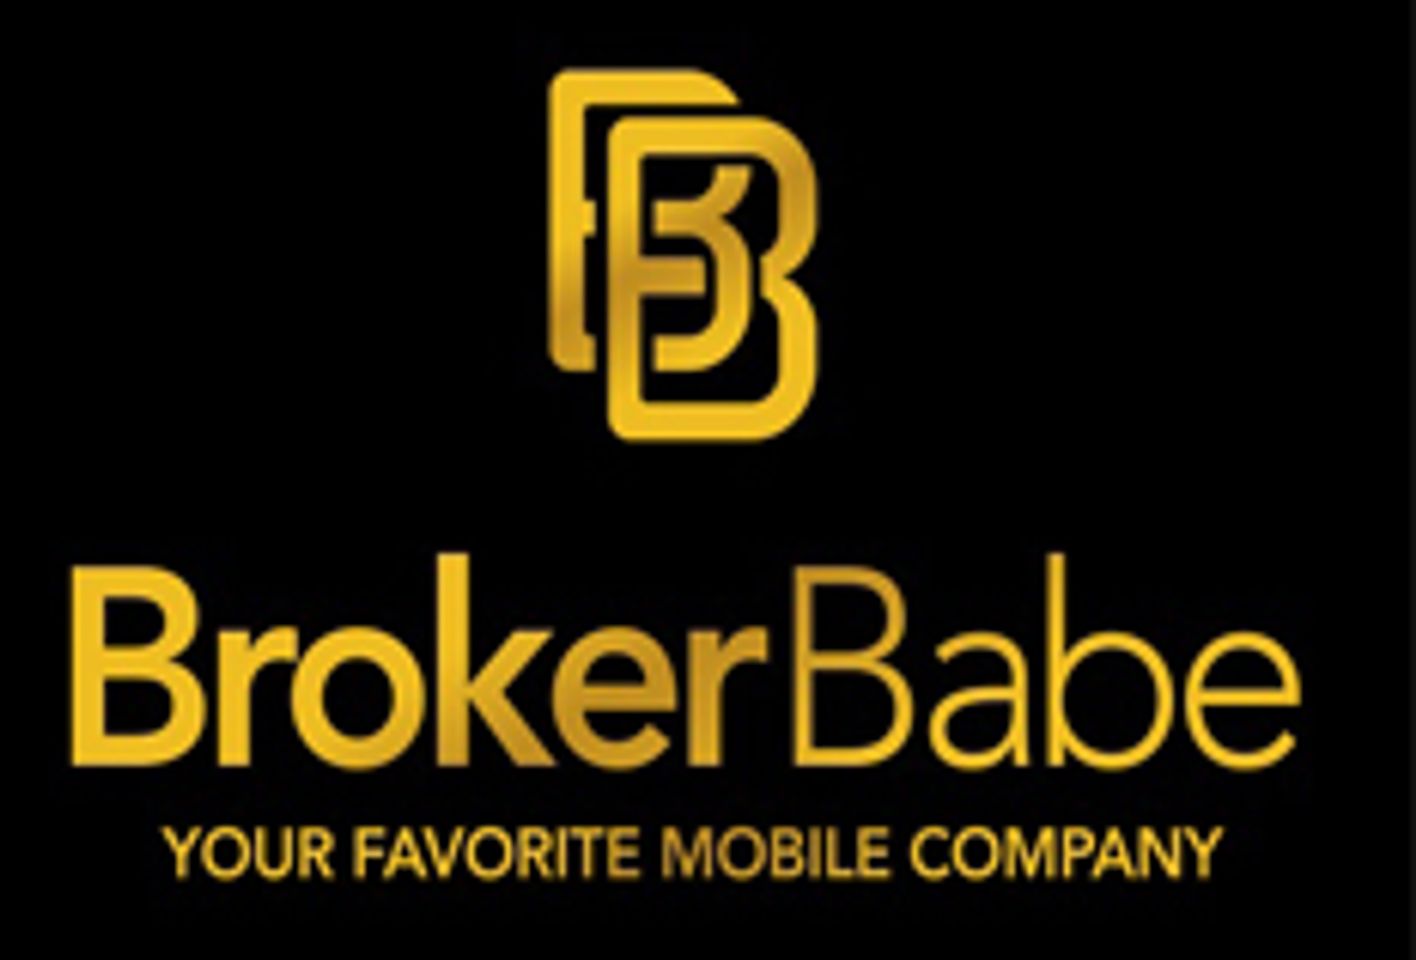 Brokerbabe.com Launches New Mobile Traffic Conversion Solution